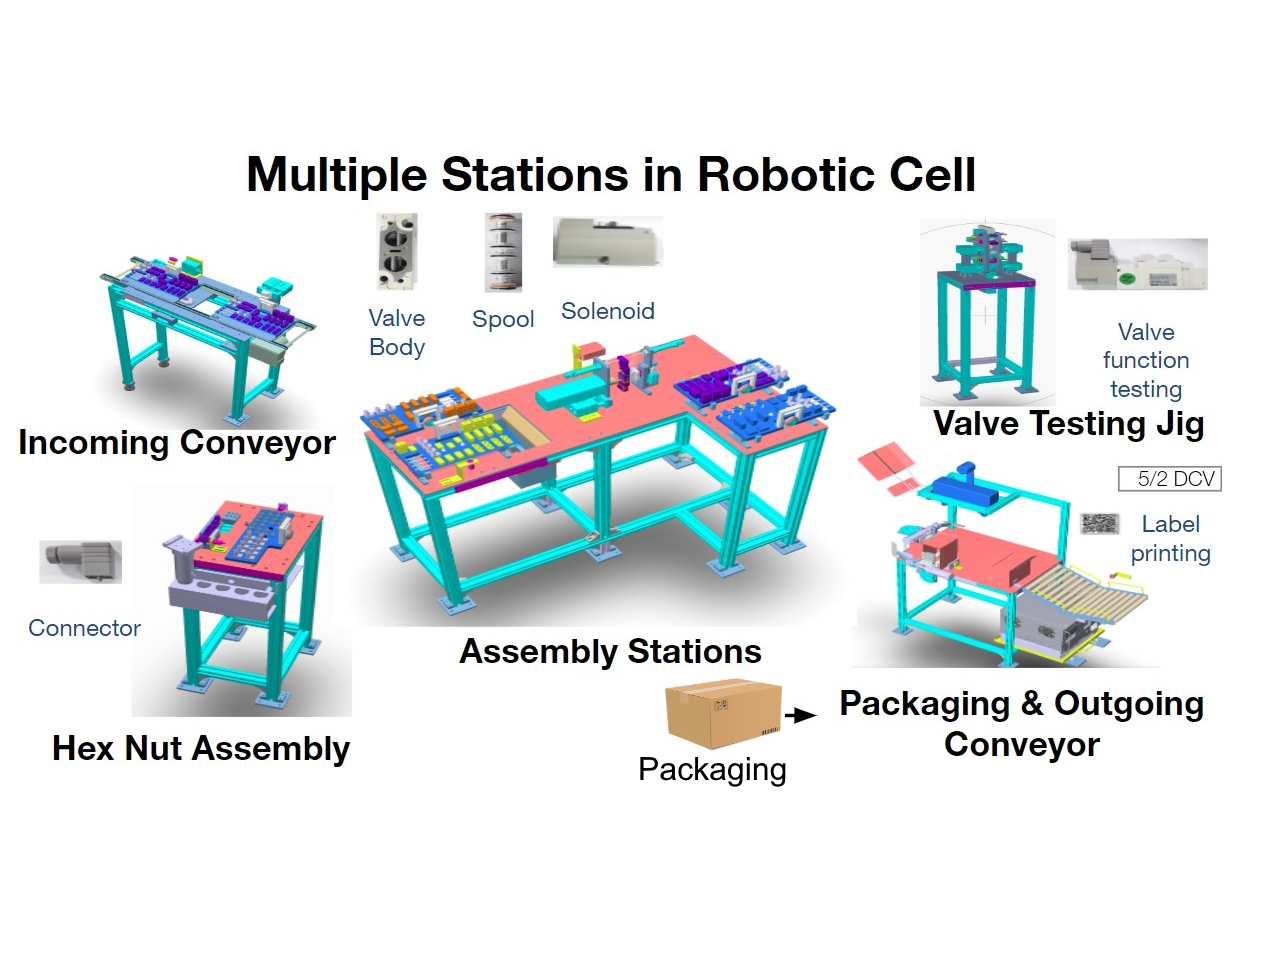 Multiprocess Robotic Cell